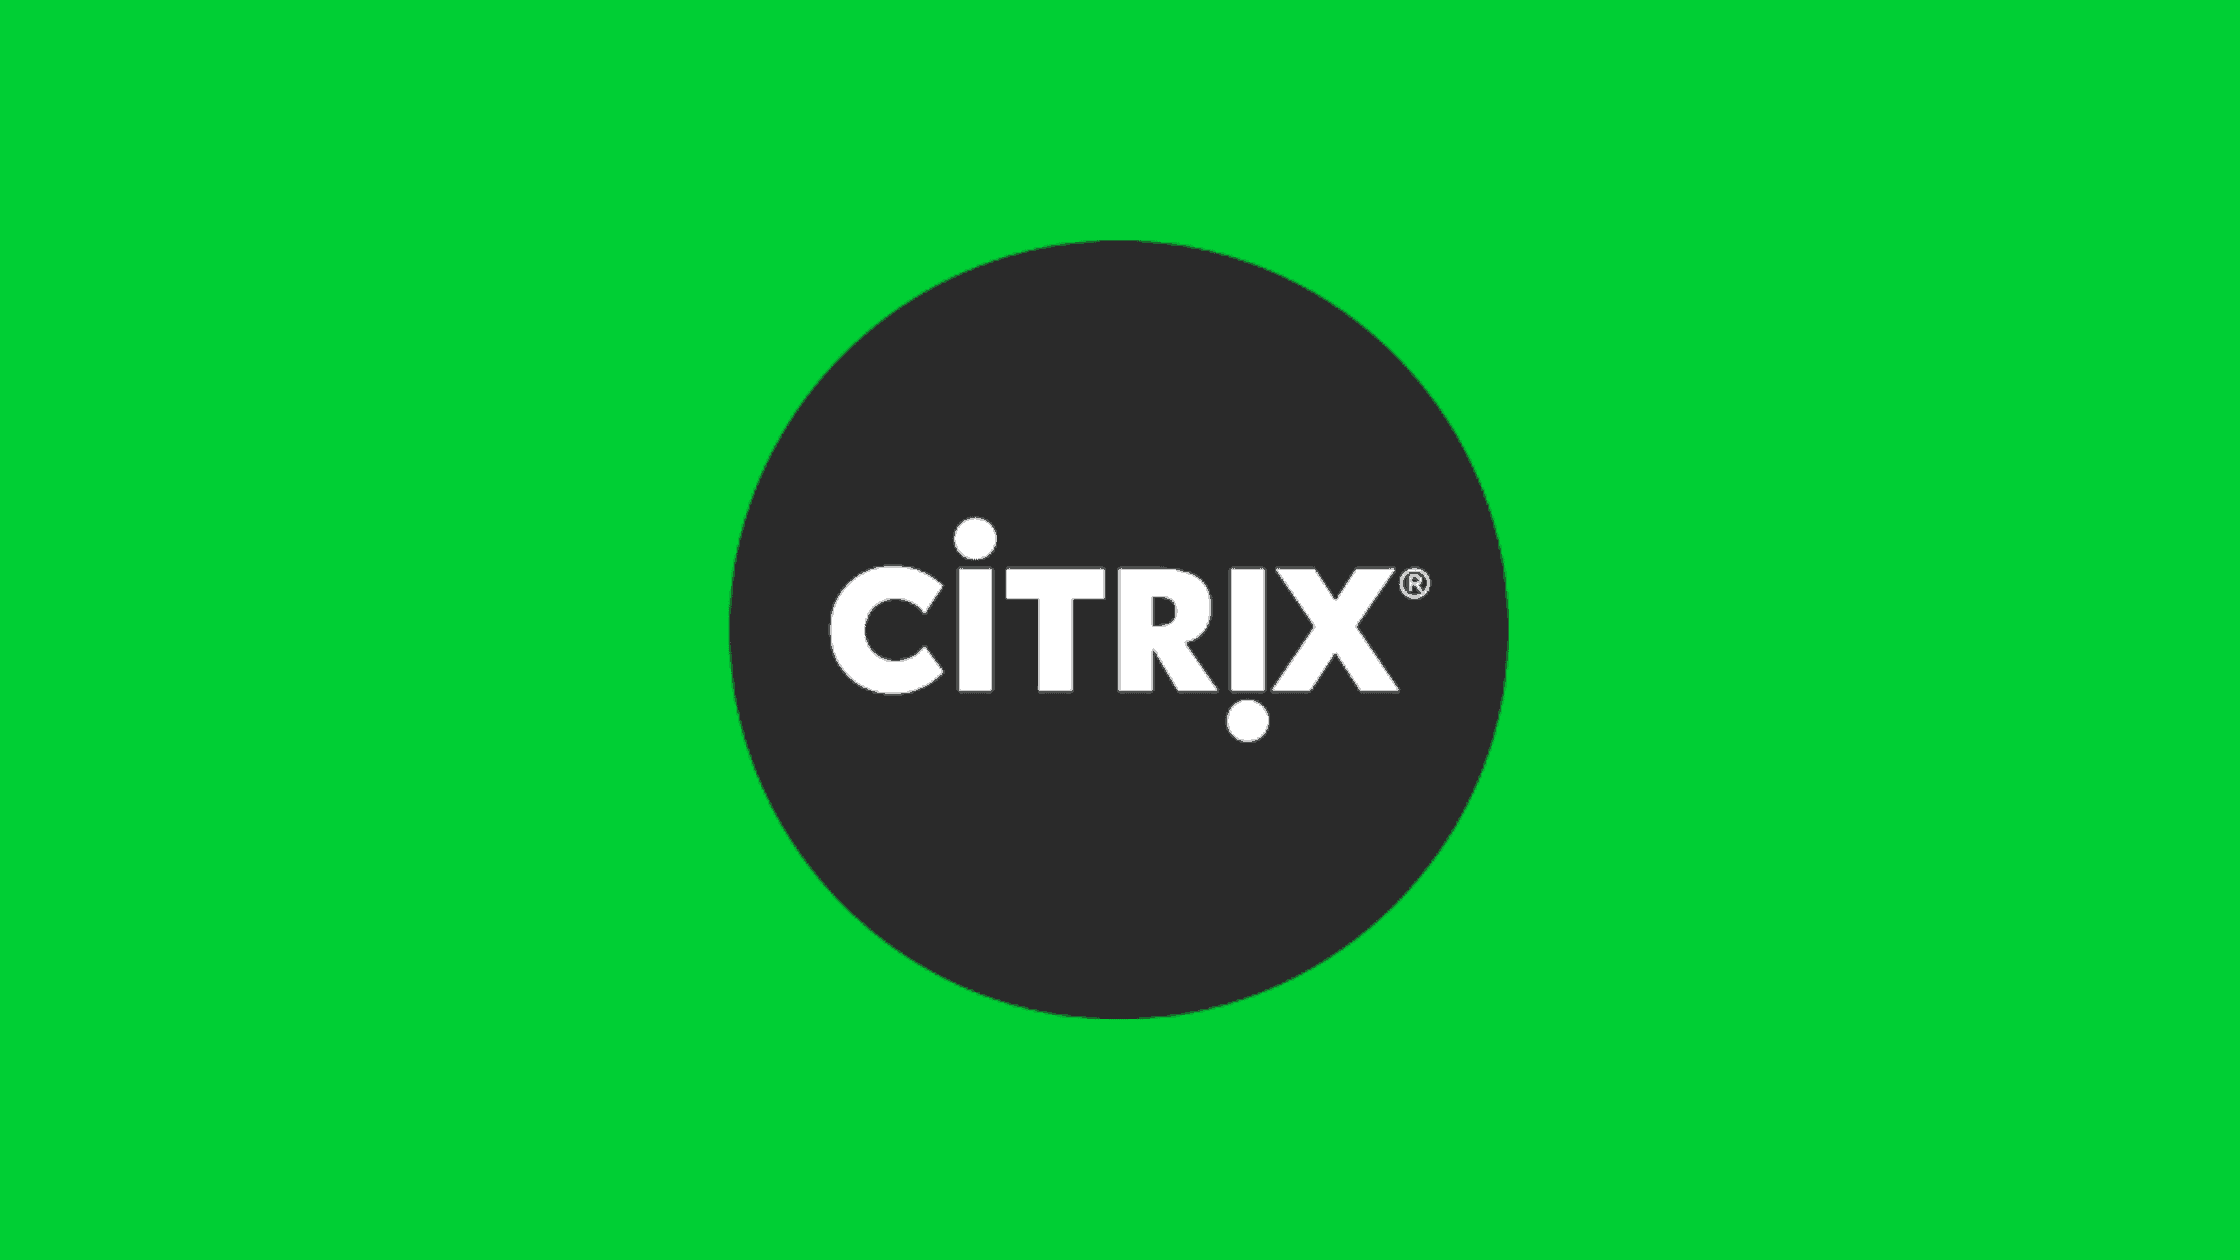 How To Patch The 3 New Critical Vulnerabilities In Citrix Adc And Gateway Products